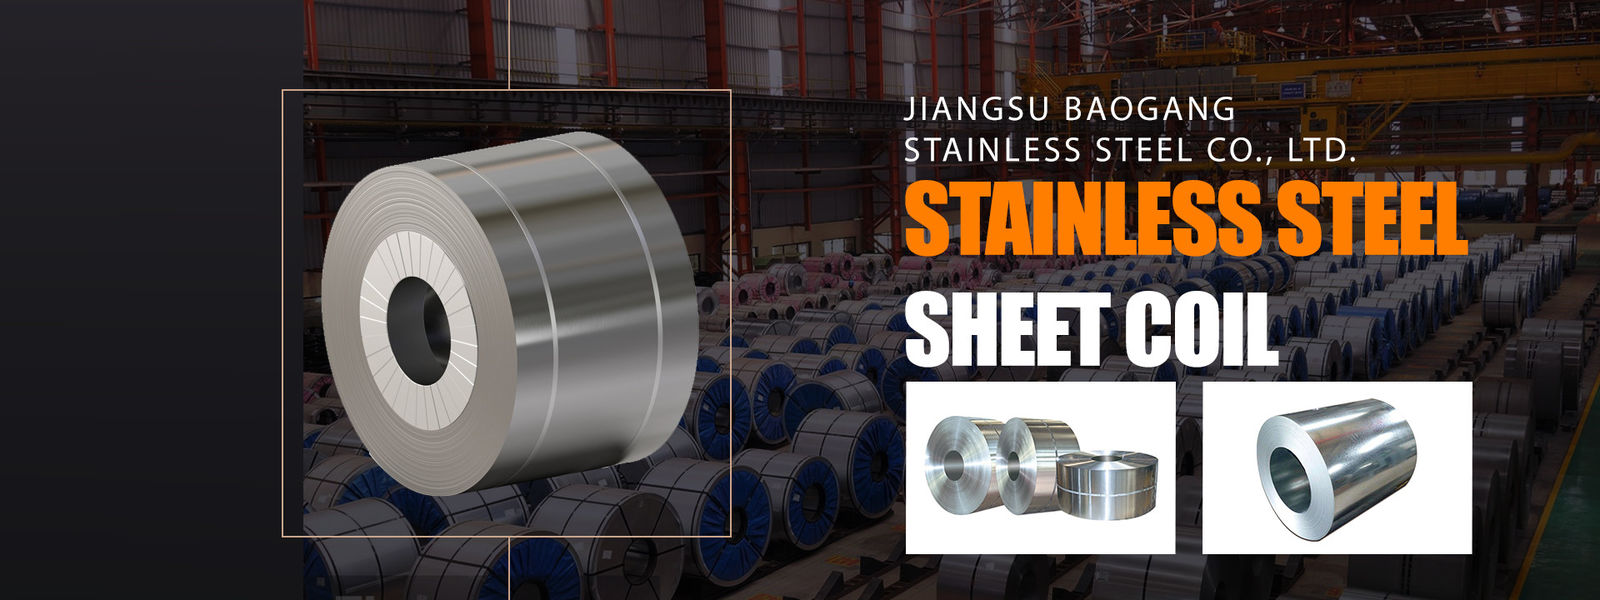 Stainless Steel Sheet Coil